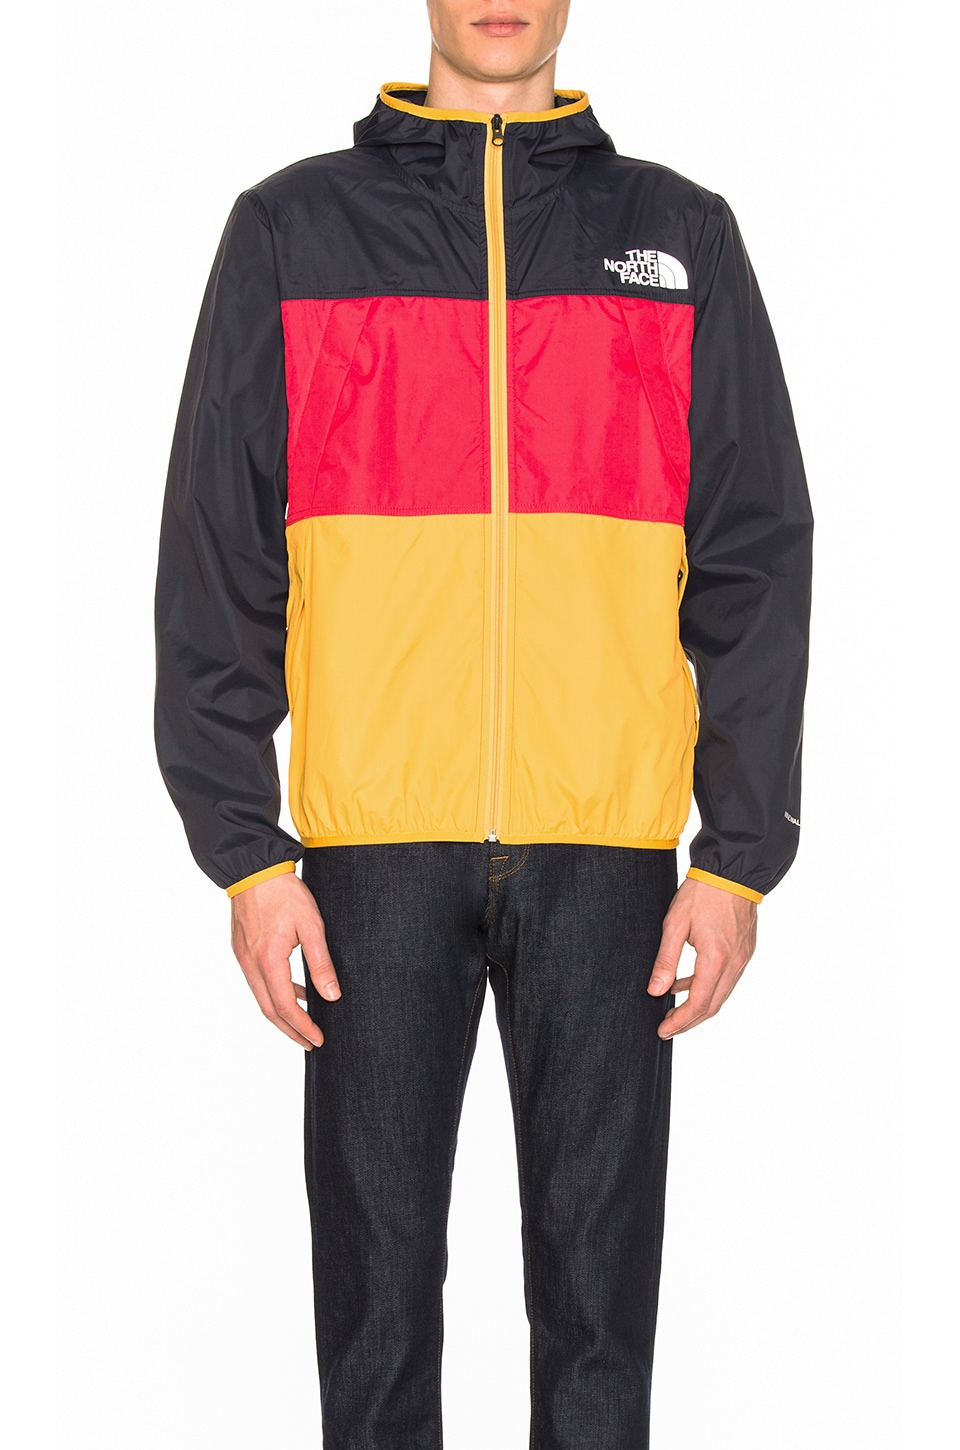 The North Face Telegraph Wind Jacket in 